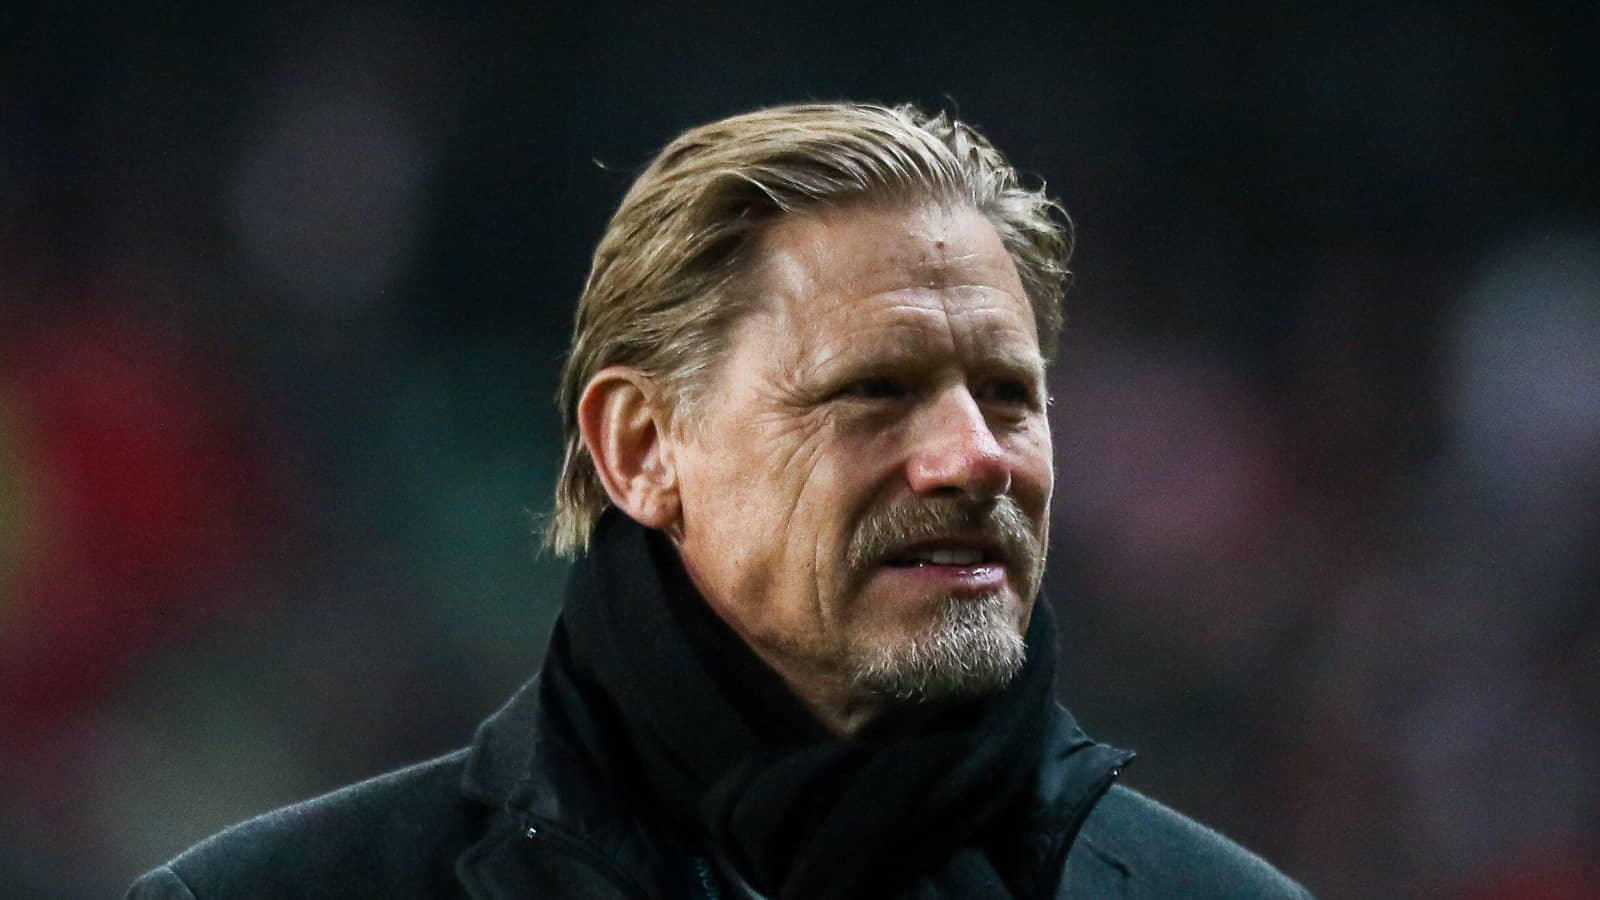 Peter Schmeichel slams Man United star after 3-0 loss to City